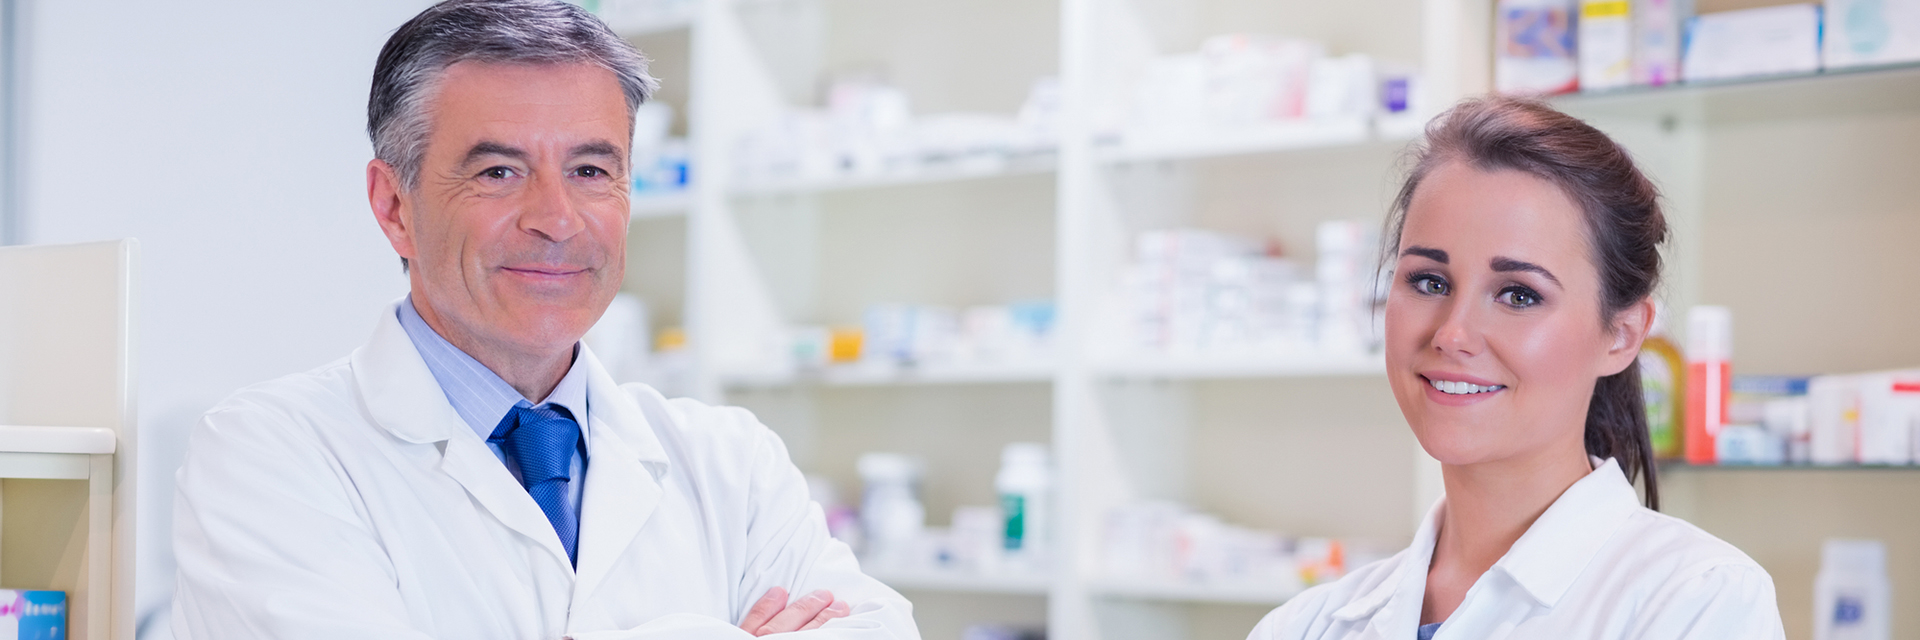 Male and female pharmacist both smiling at the camera with pharmacy shelves in background